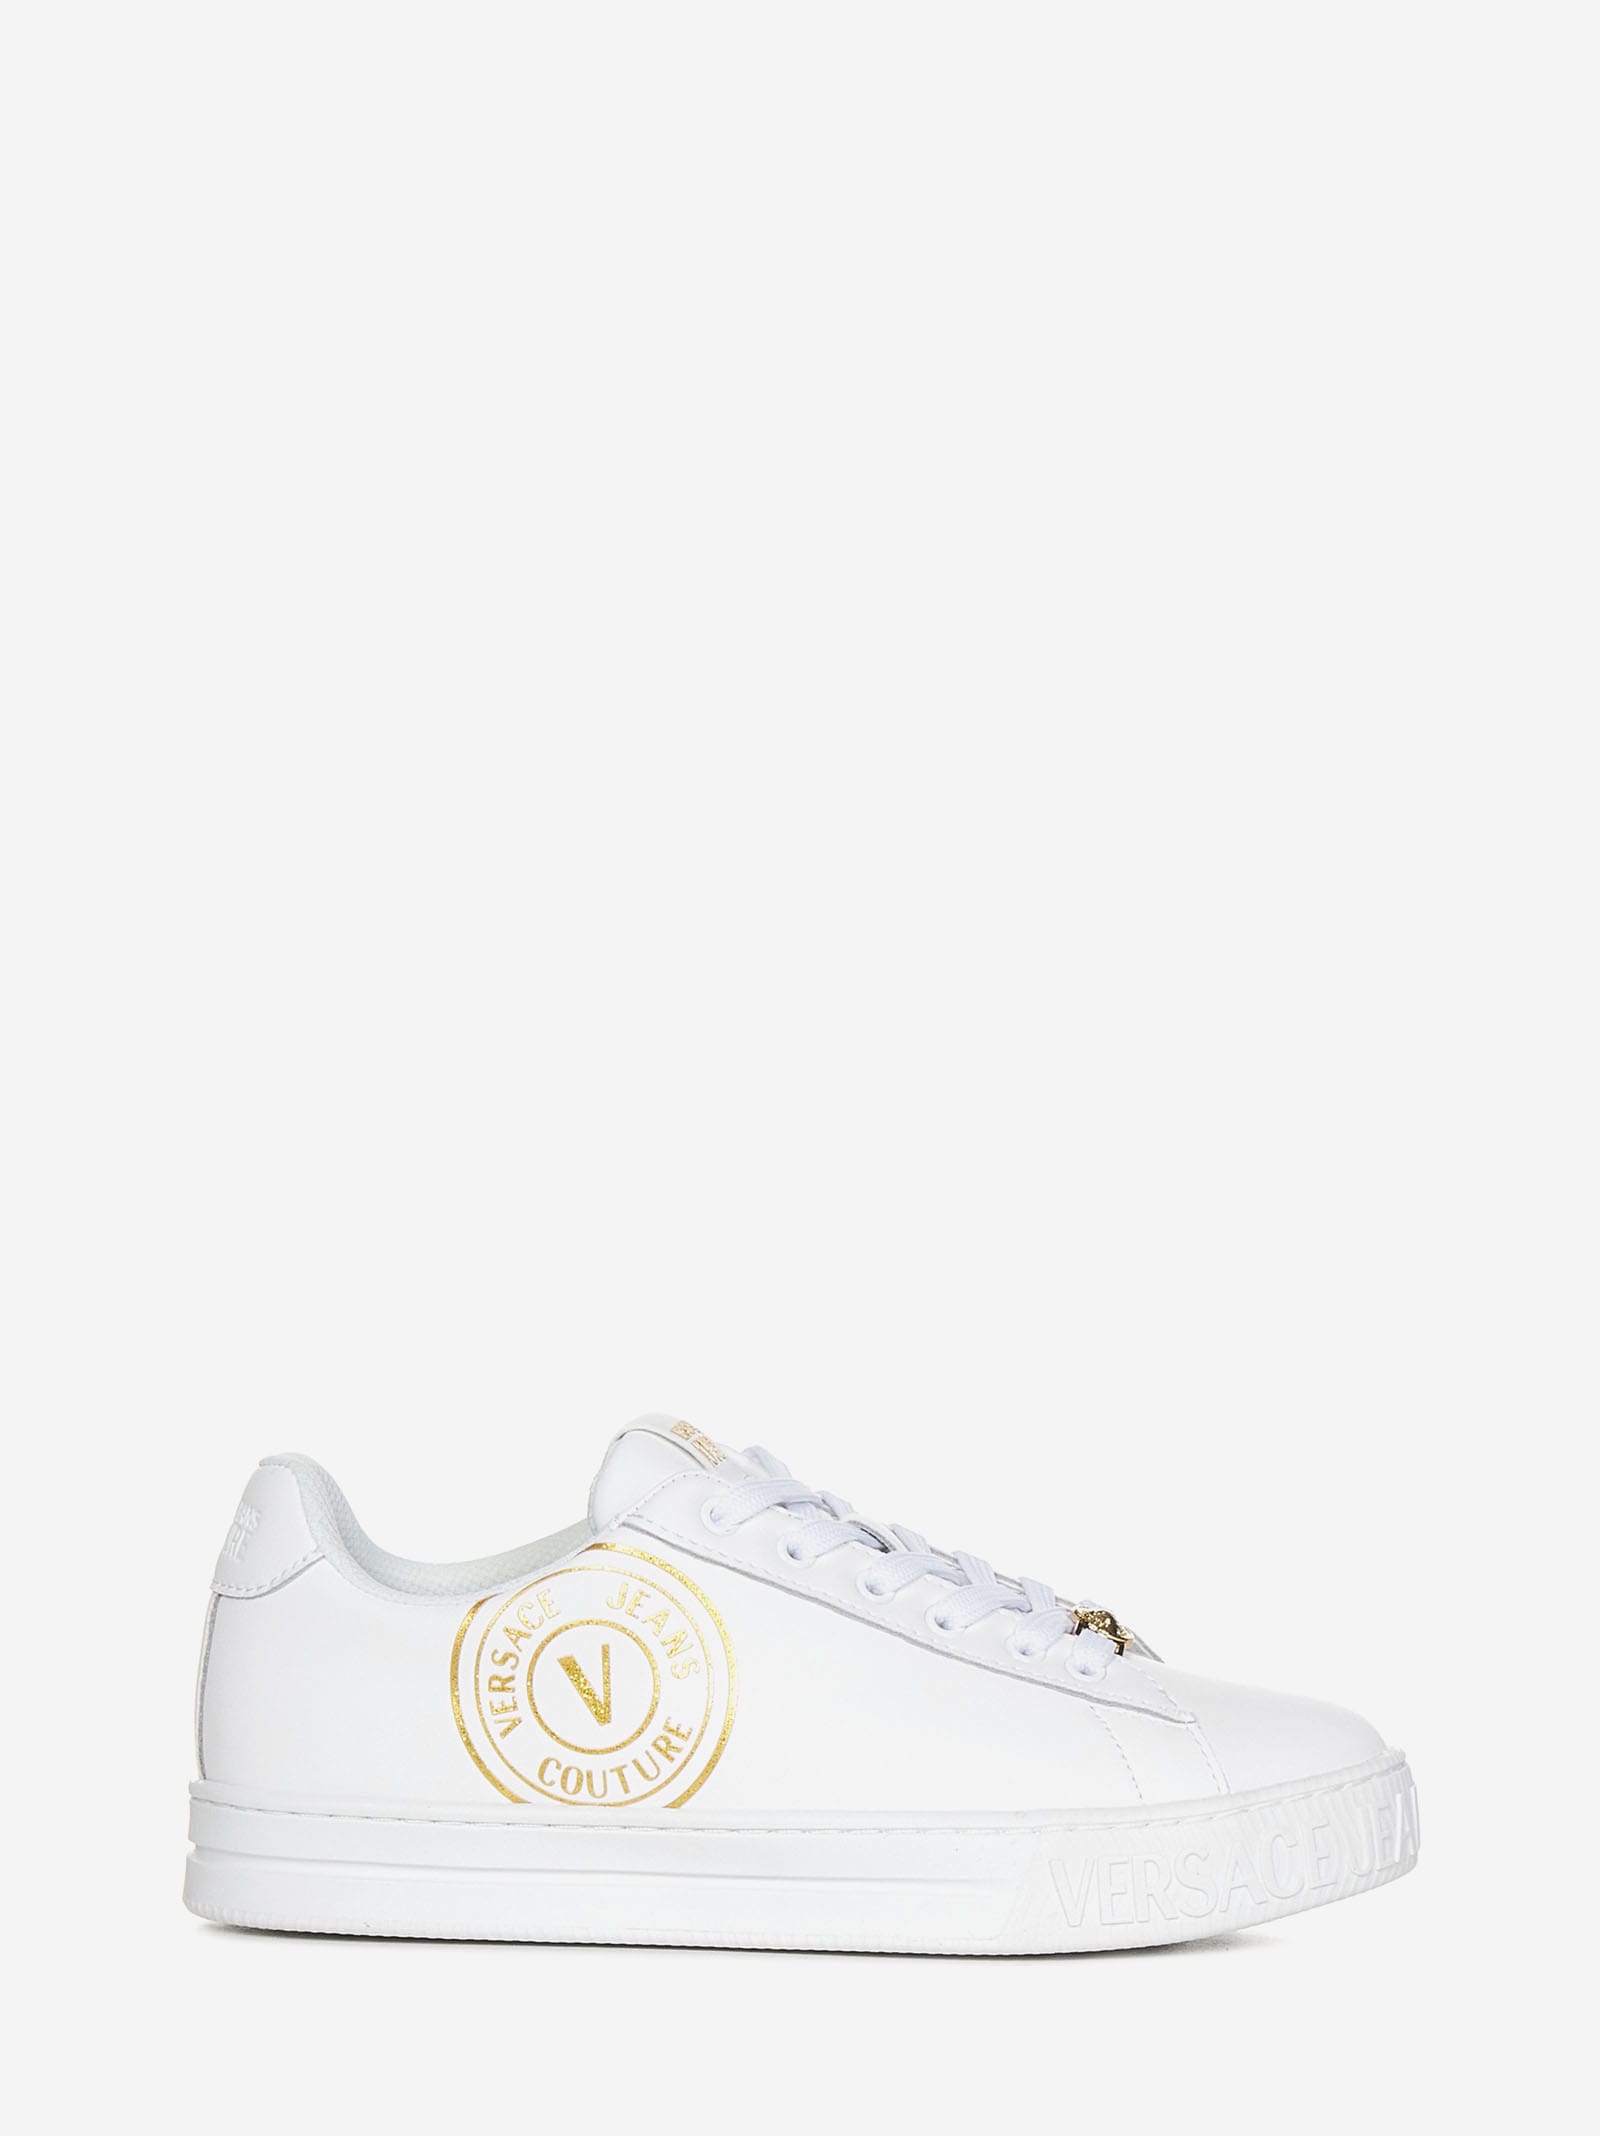 Versace Jeans Couture Court 88 V-emblem Sneakers